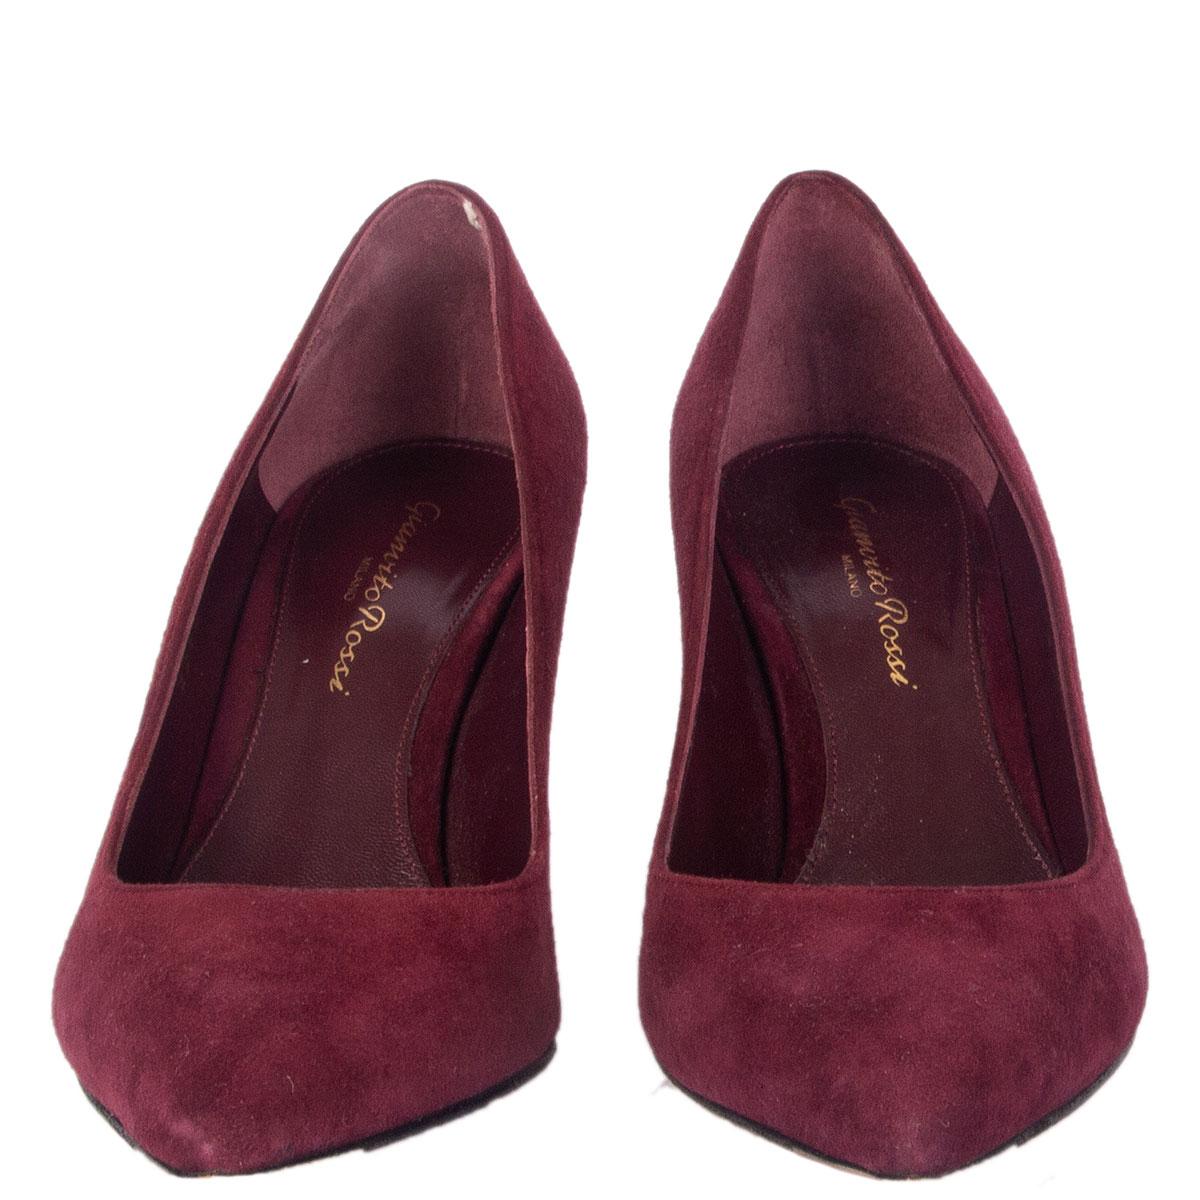 100% authentic Gianvito Rossi 70 pointed-toe pumps in burgundy suede leather. Have been worn and are in excellent condition. 

Measurements
Imprinted Size	36
Shoe Size	36
Inside Sole	23.5cm (9.2in)
Width	7.5cm (2.9in)
Heel	7cm (2.7in)

All our